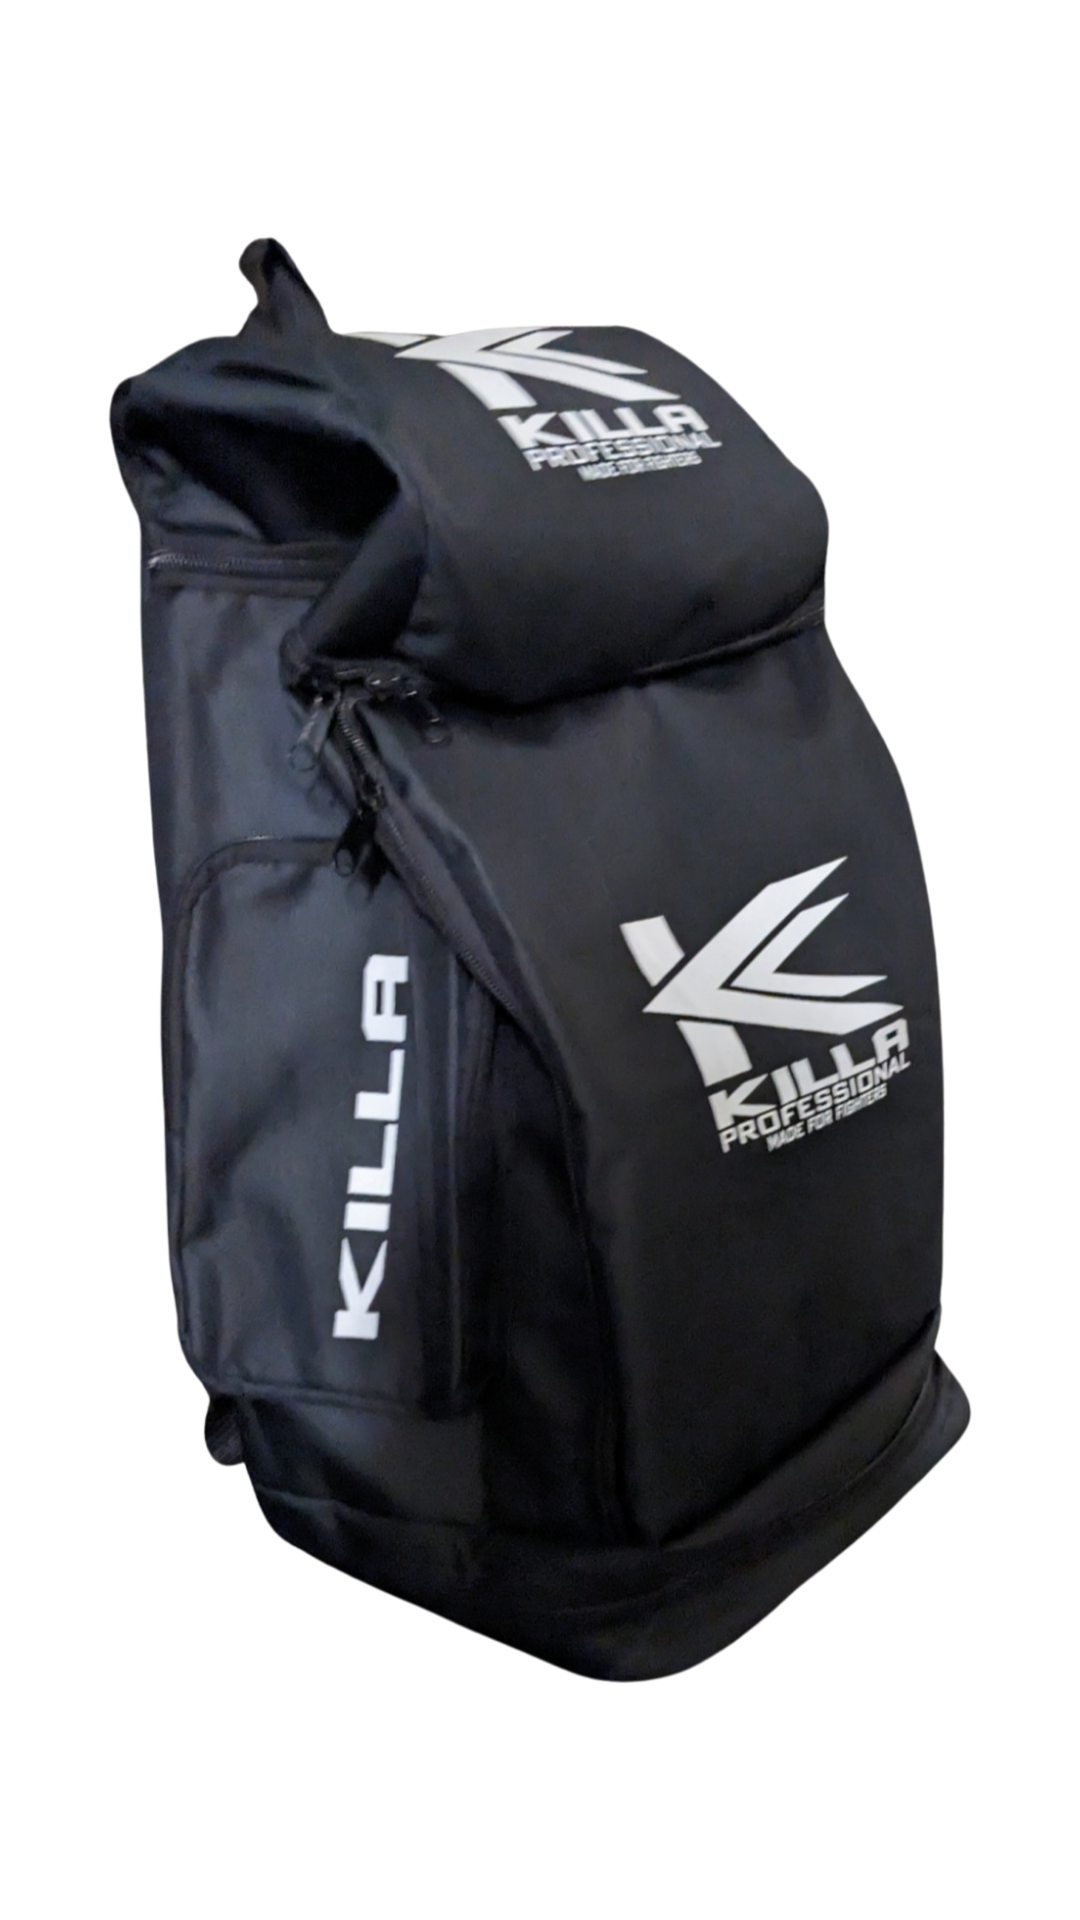 Ultimate Boxing Gear Backpack